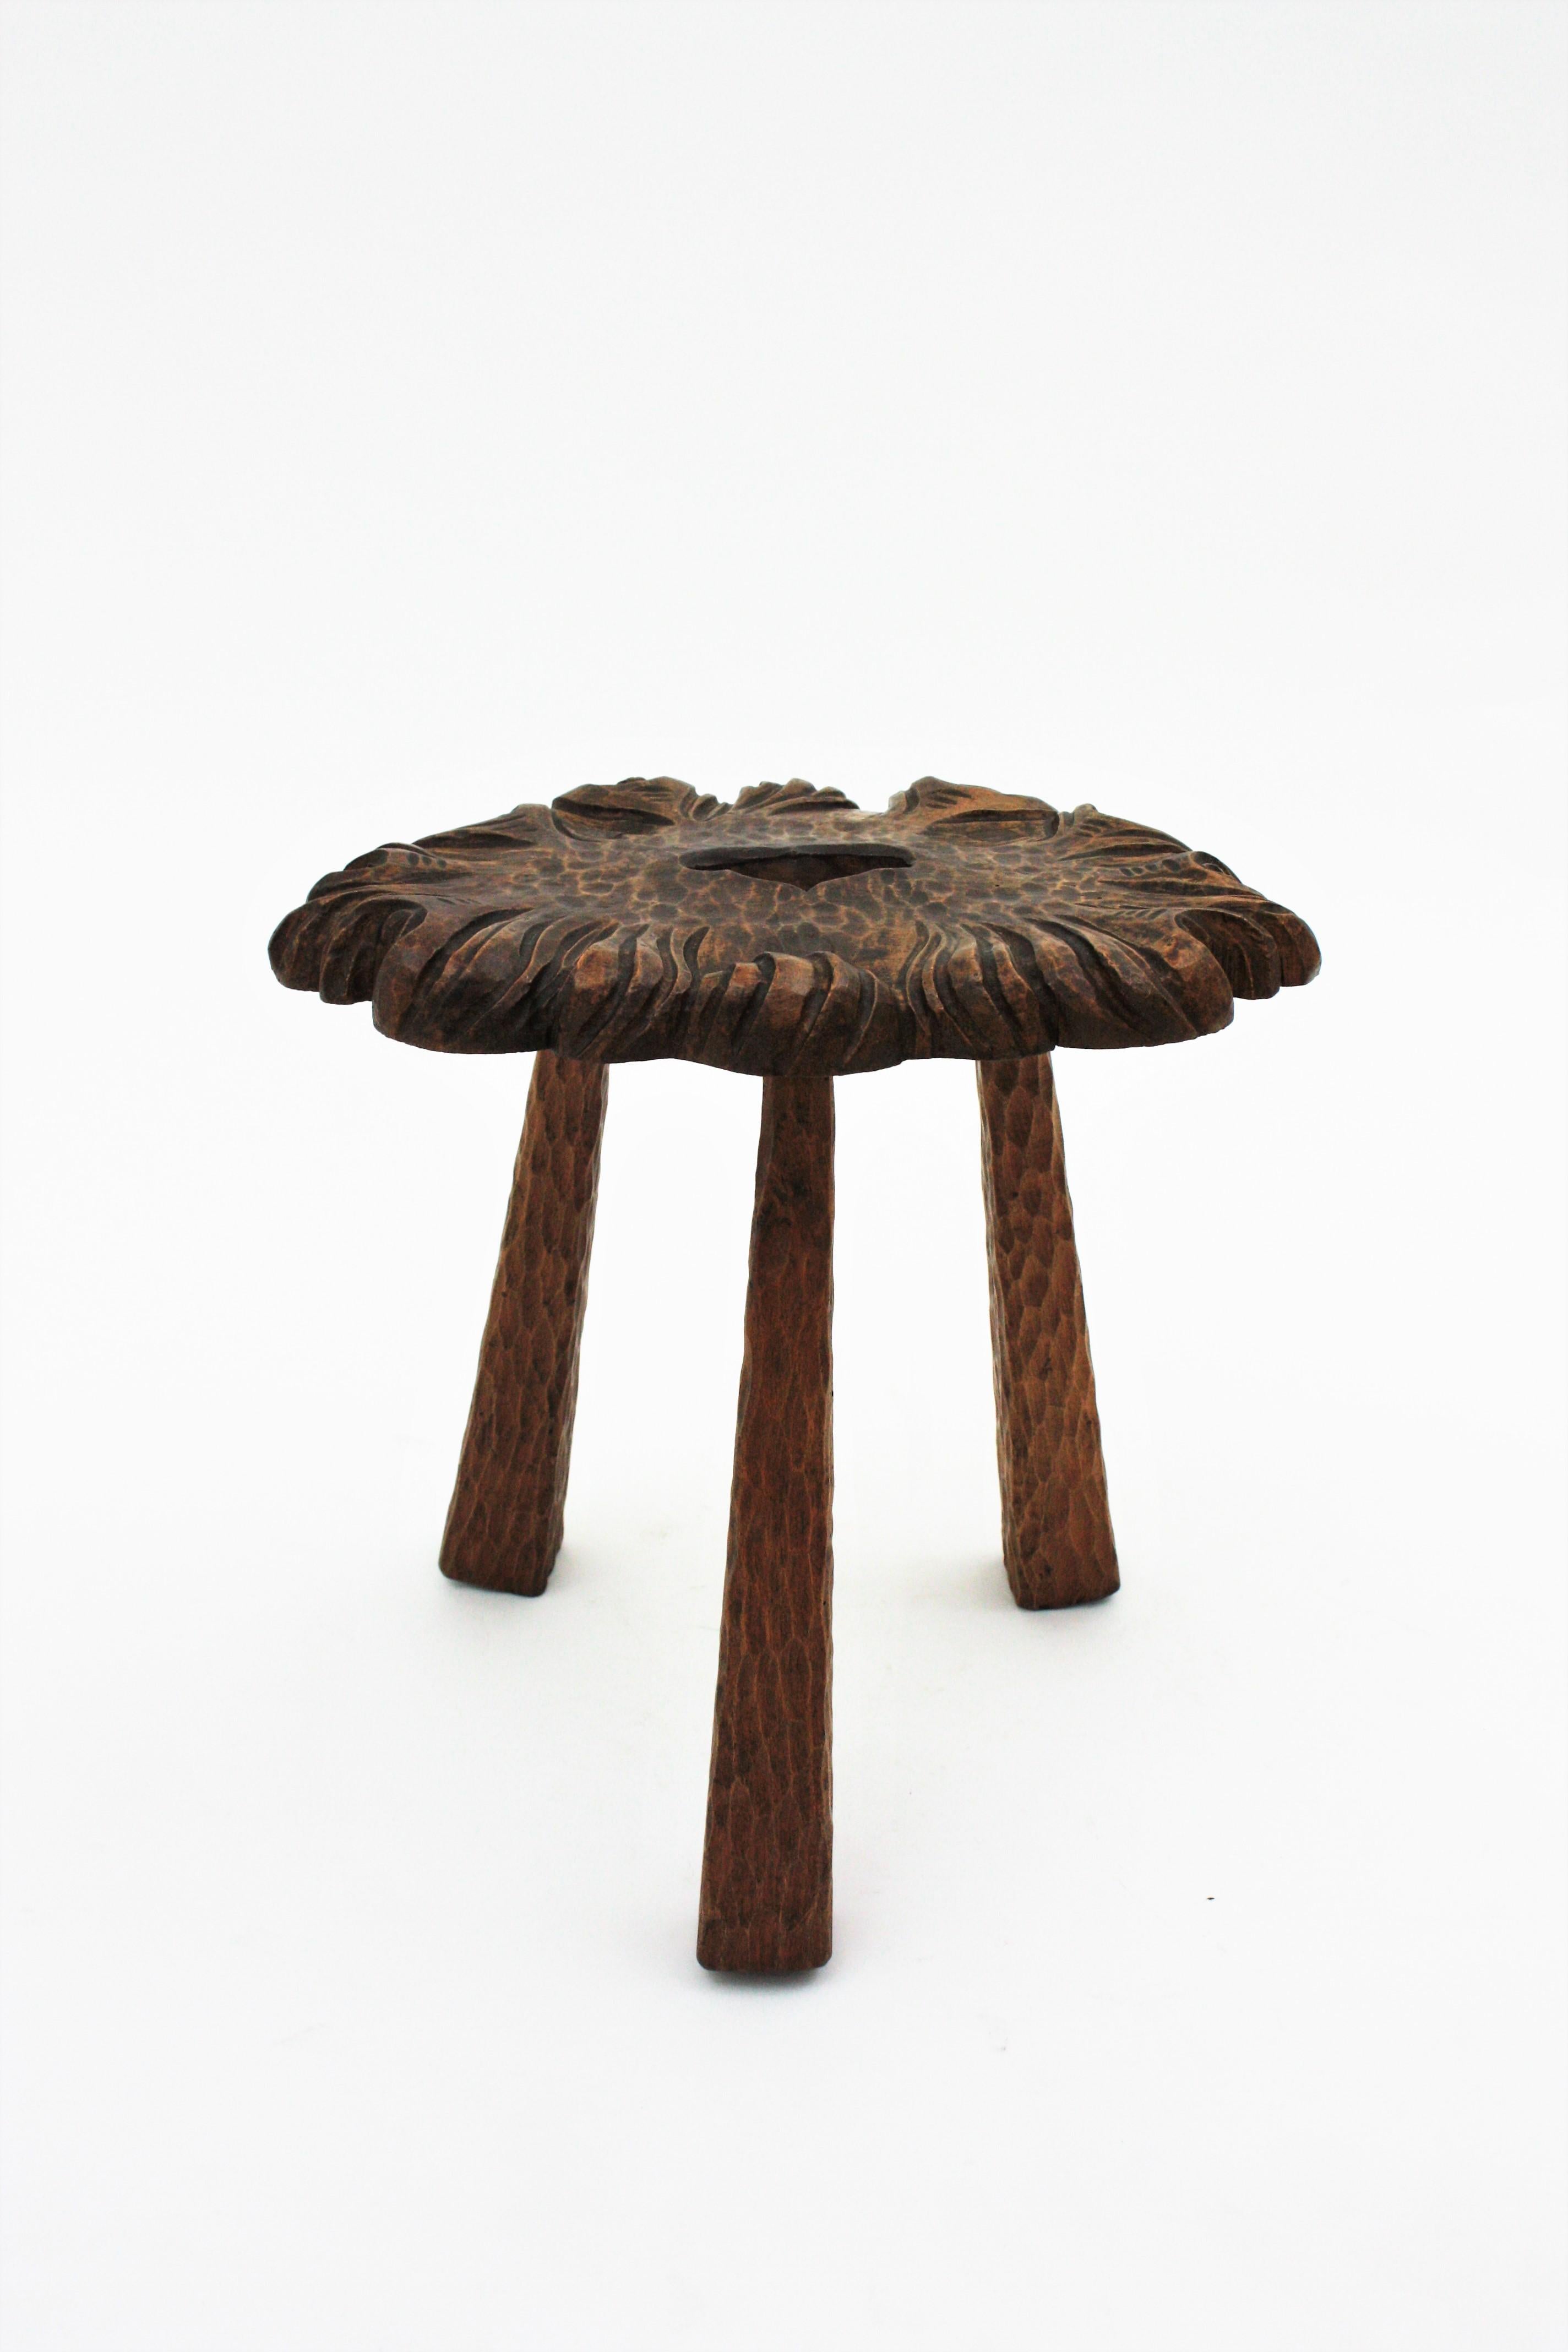 Spanish Rustic Wood Tripod Stool or Side Table For Sale 4